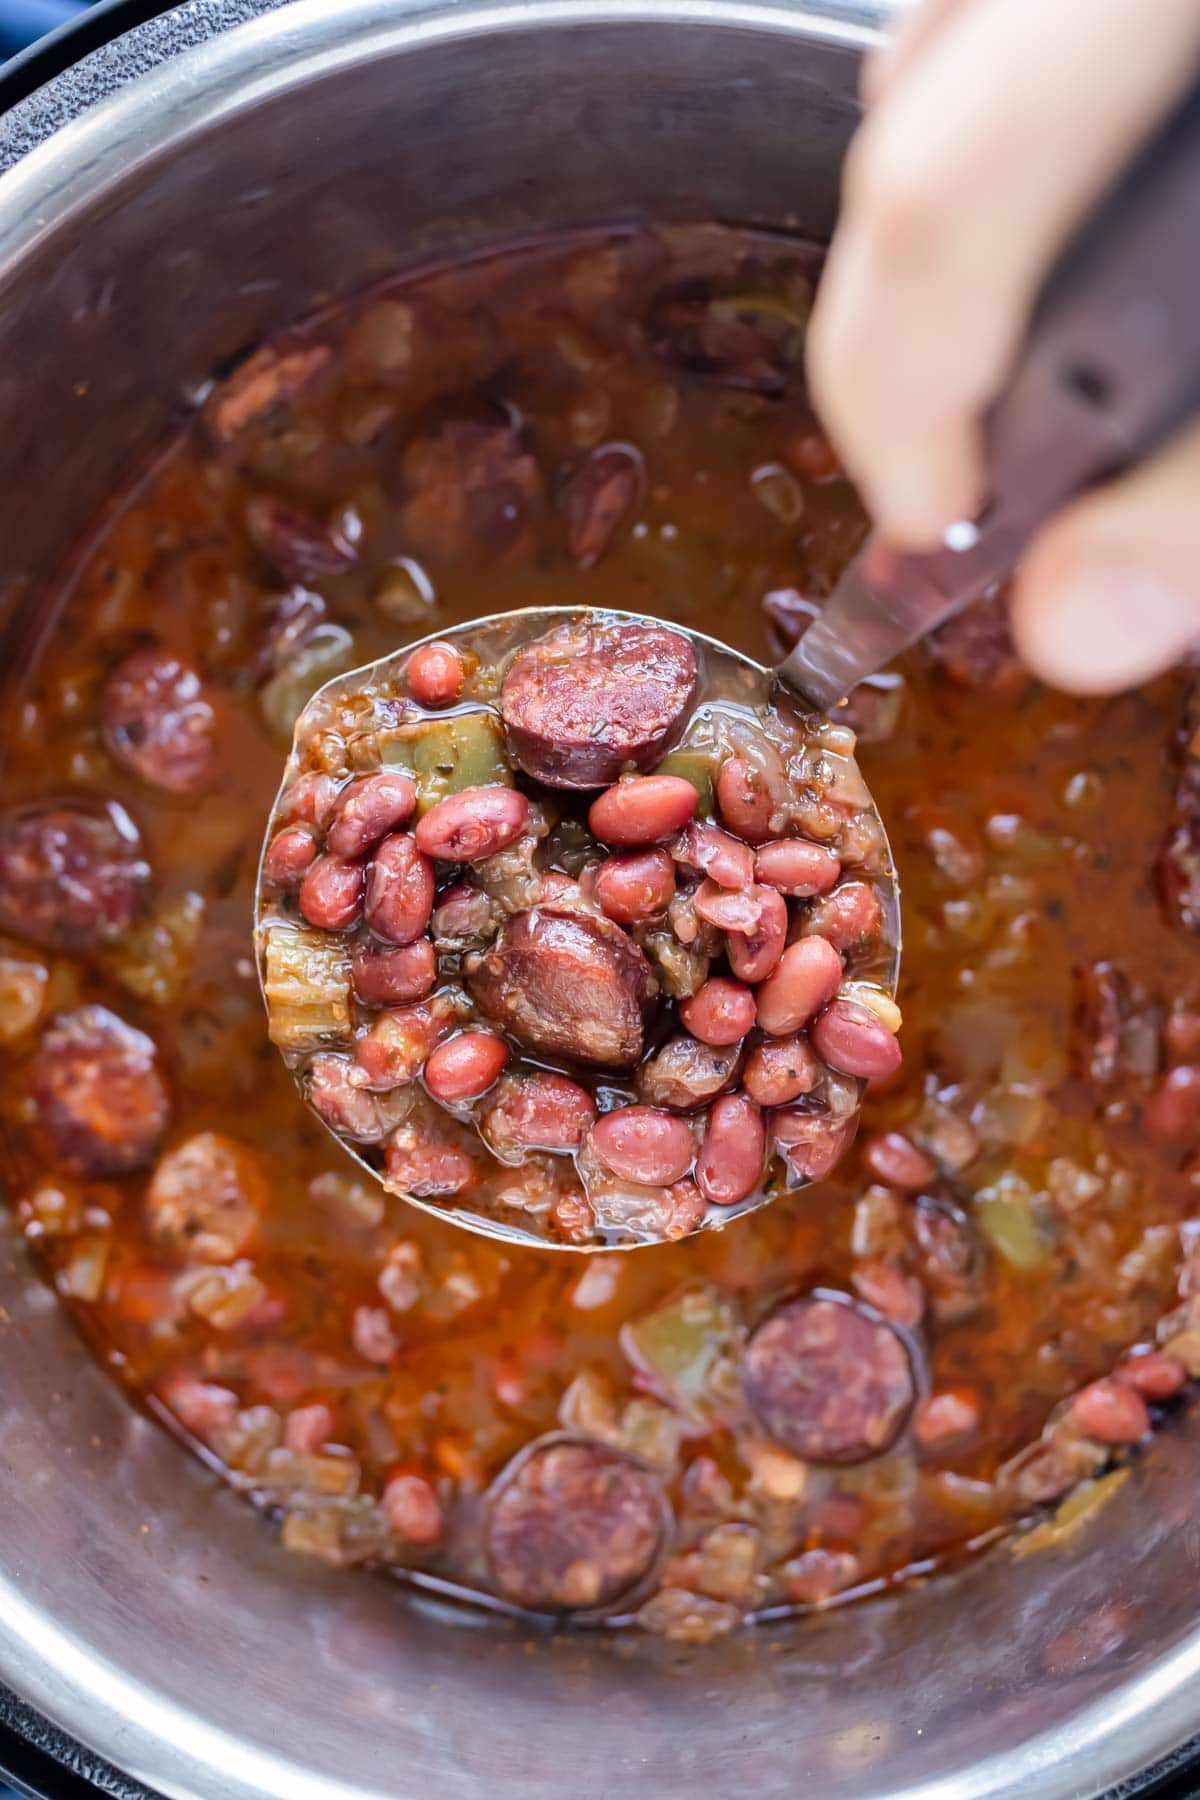 A ladle lifts up a serving of red beans and rice.